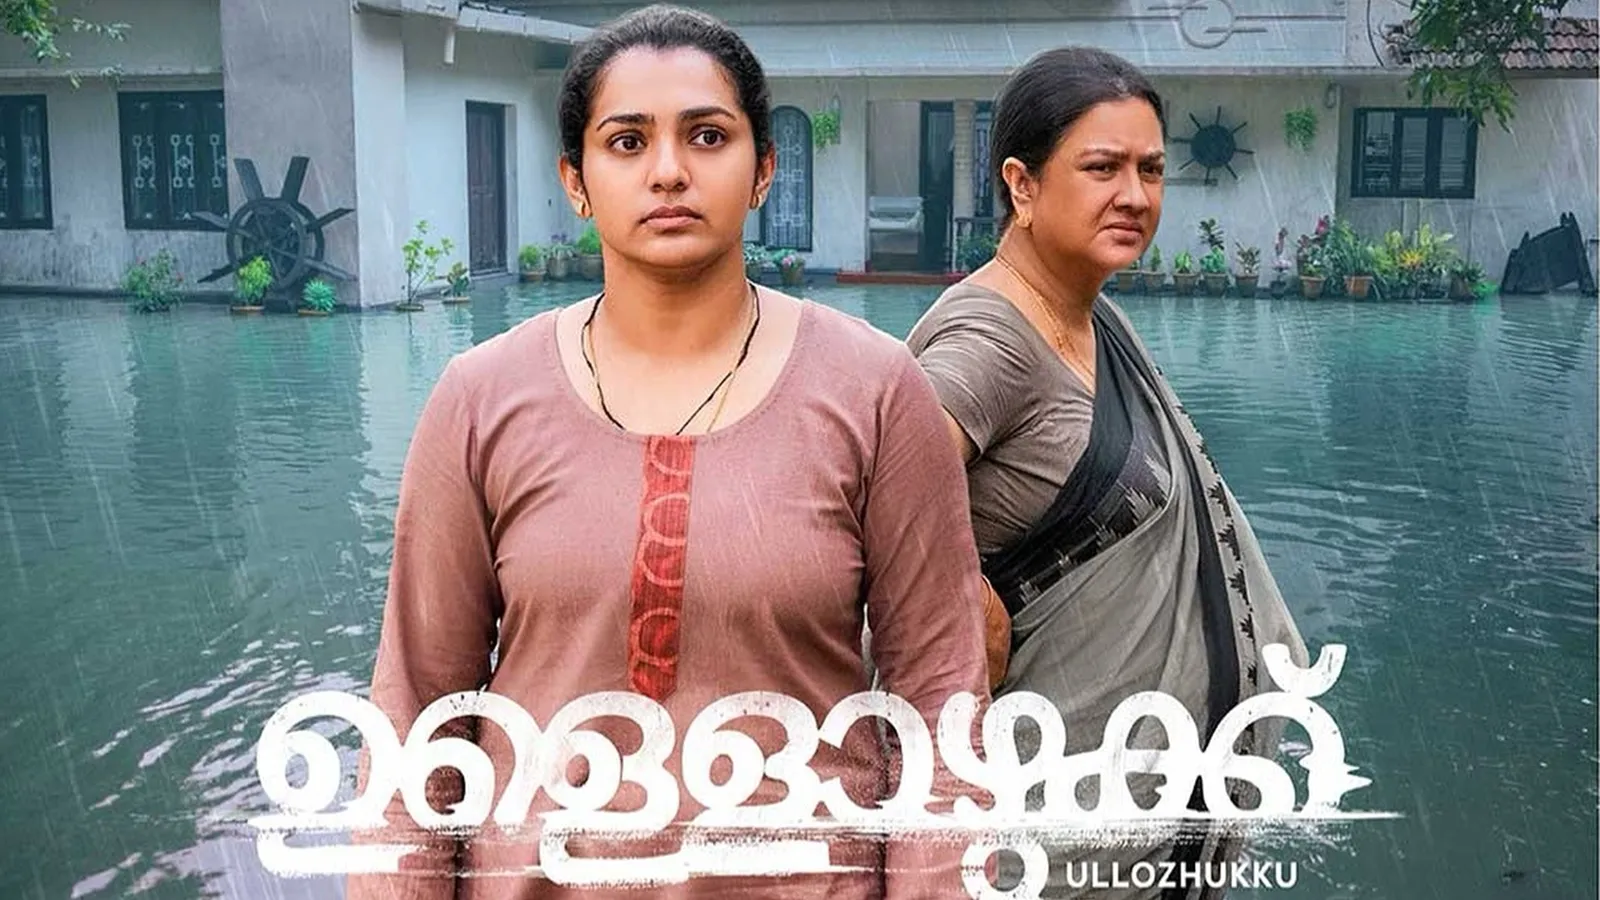 Ullozhukku teaser: Urvashi, Parvathy gear up for a performance showdown in  Curry and Cyanide director's next film